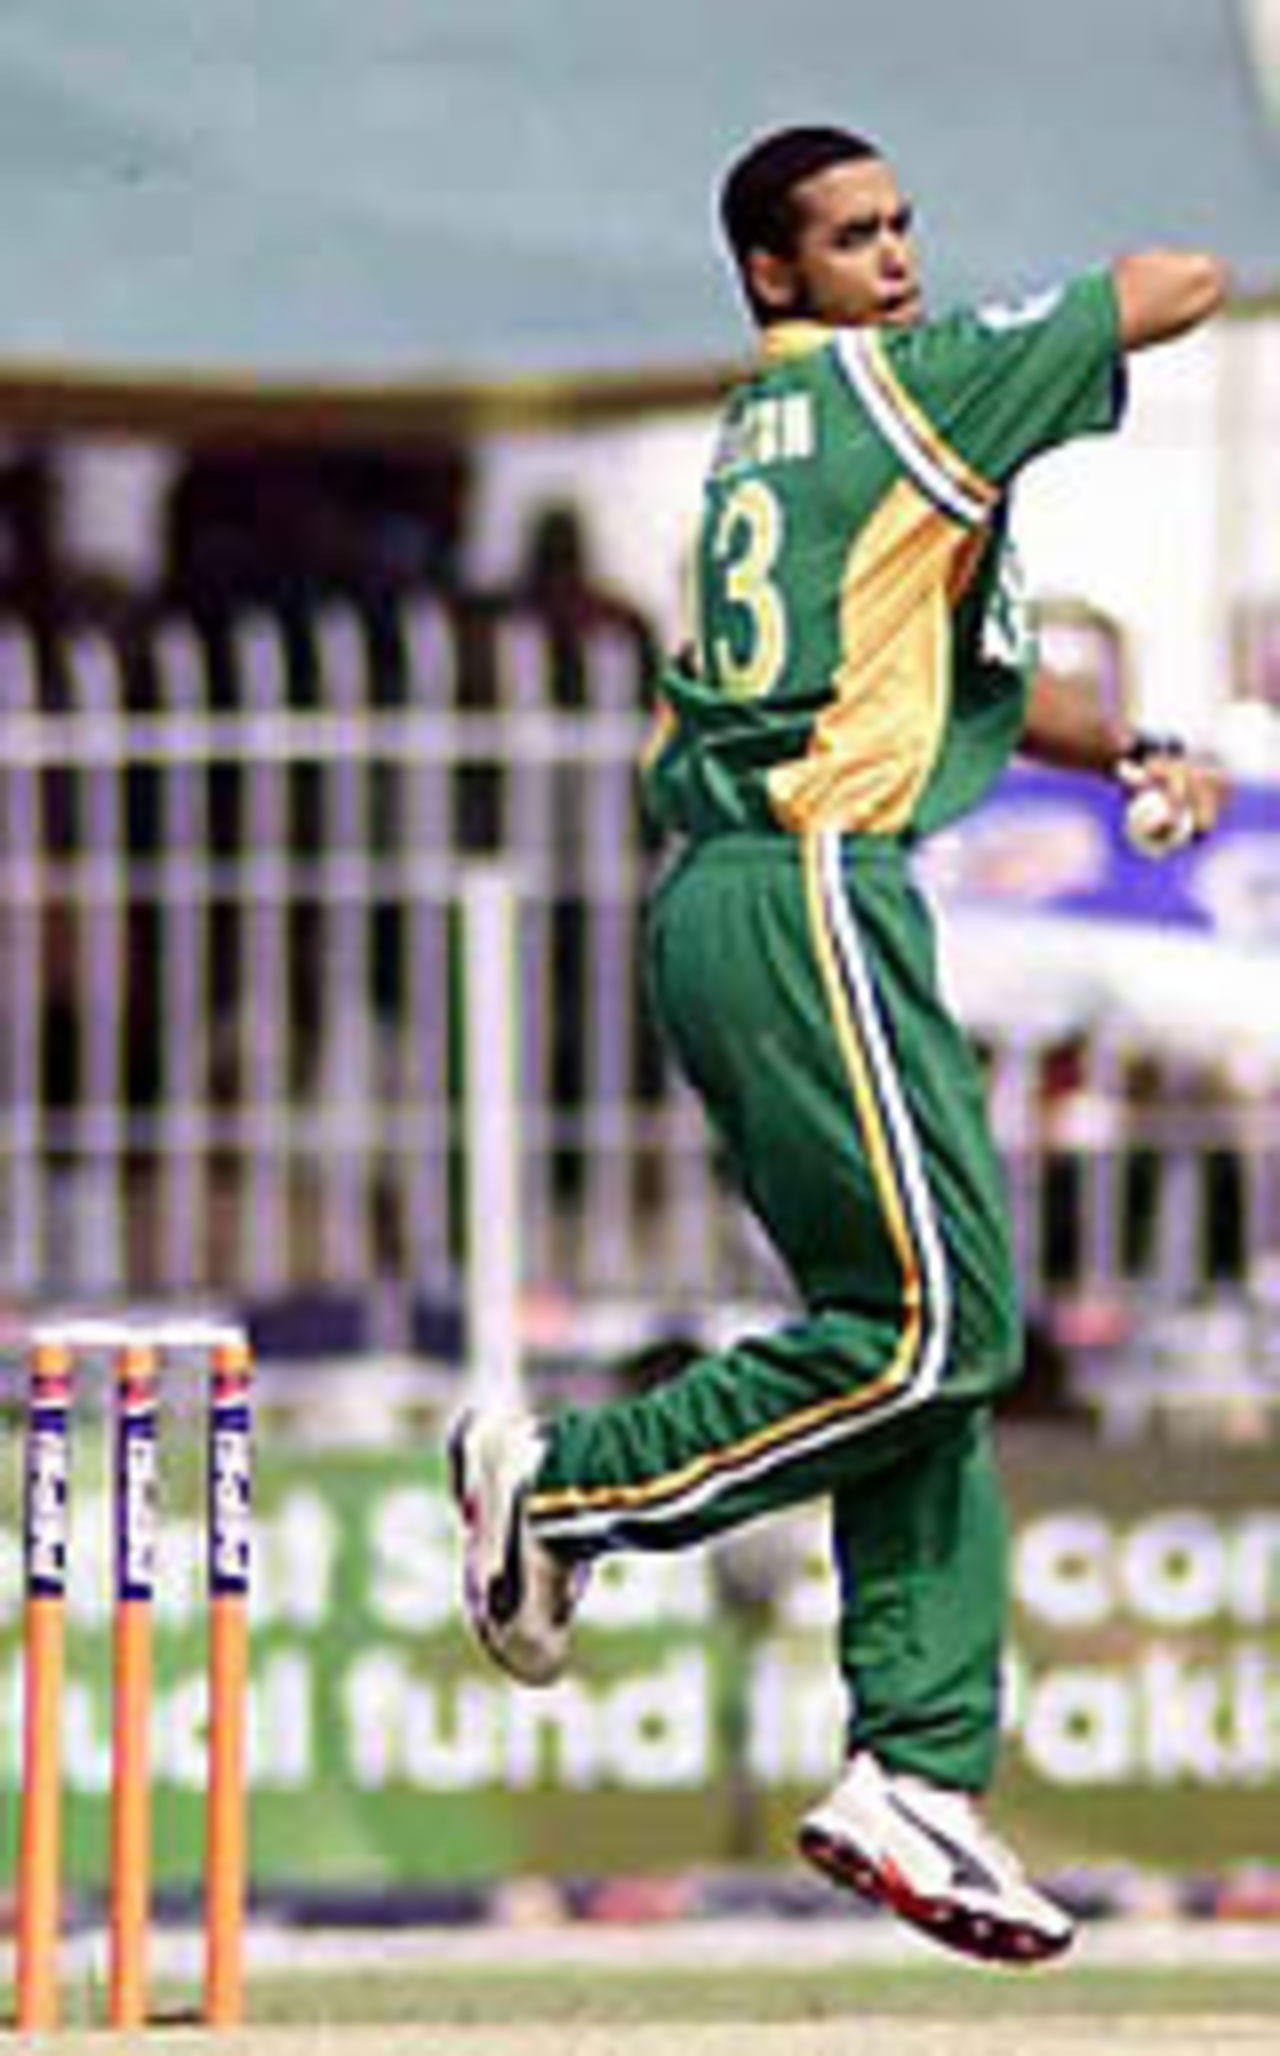 Robin Peterson in his follow through, Pakistan v South Africa, 3rd ODI, Faisalabad, October 7, 2003.